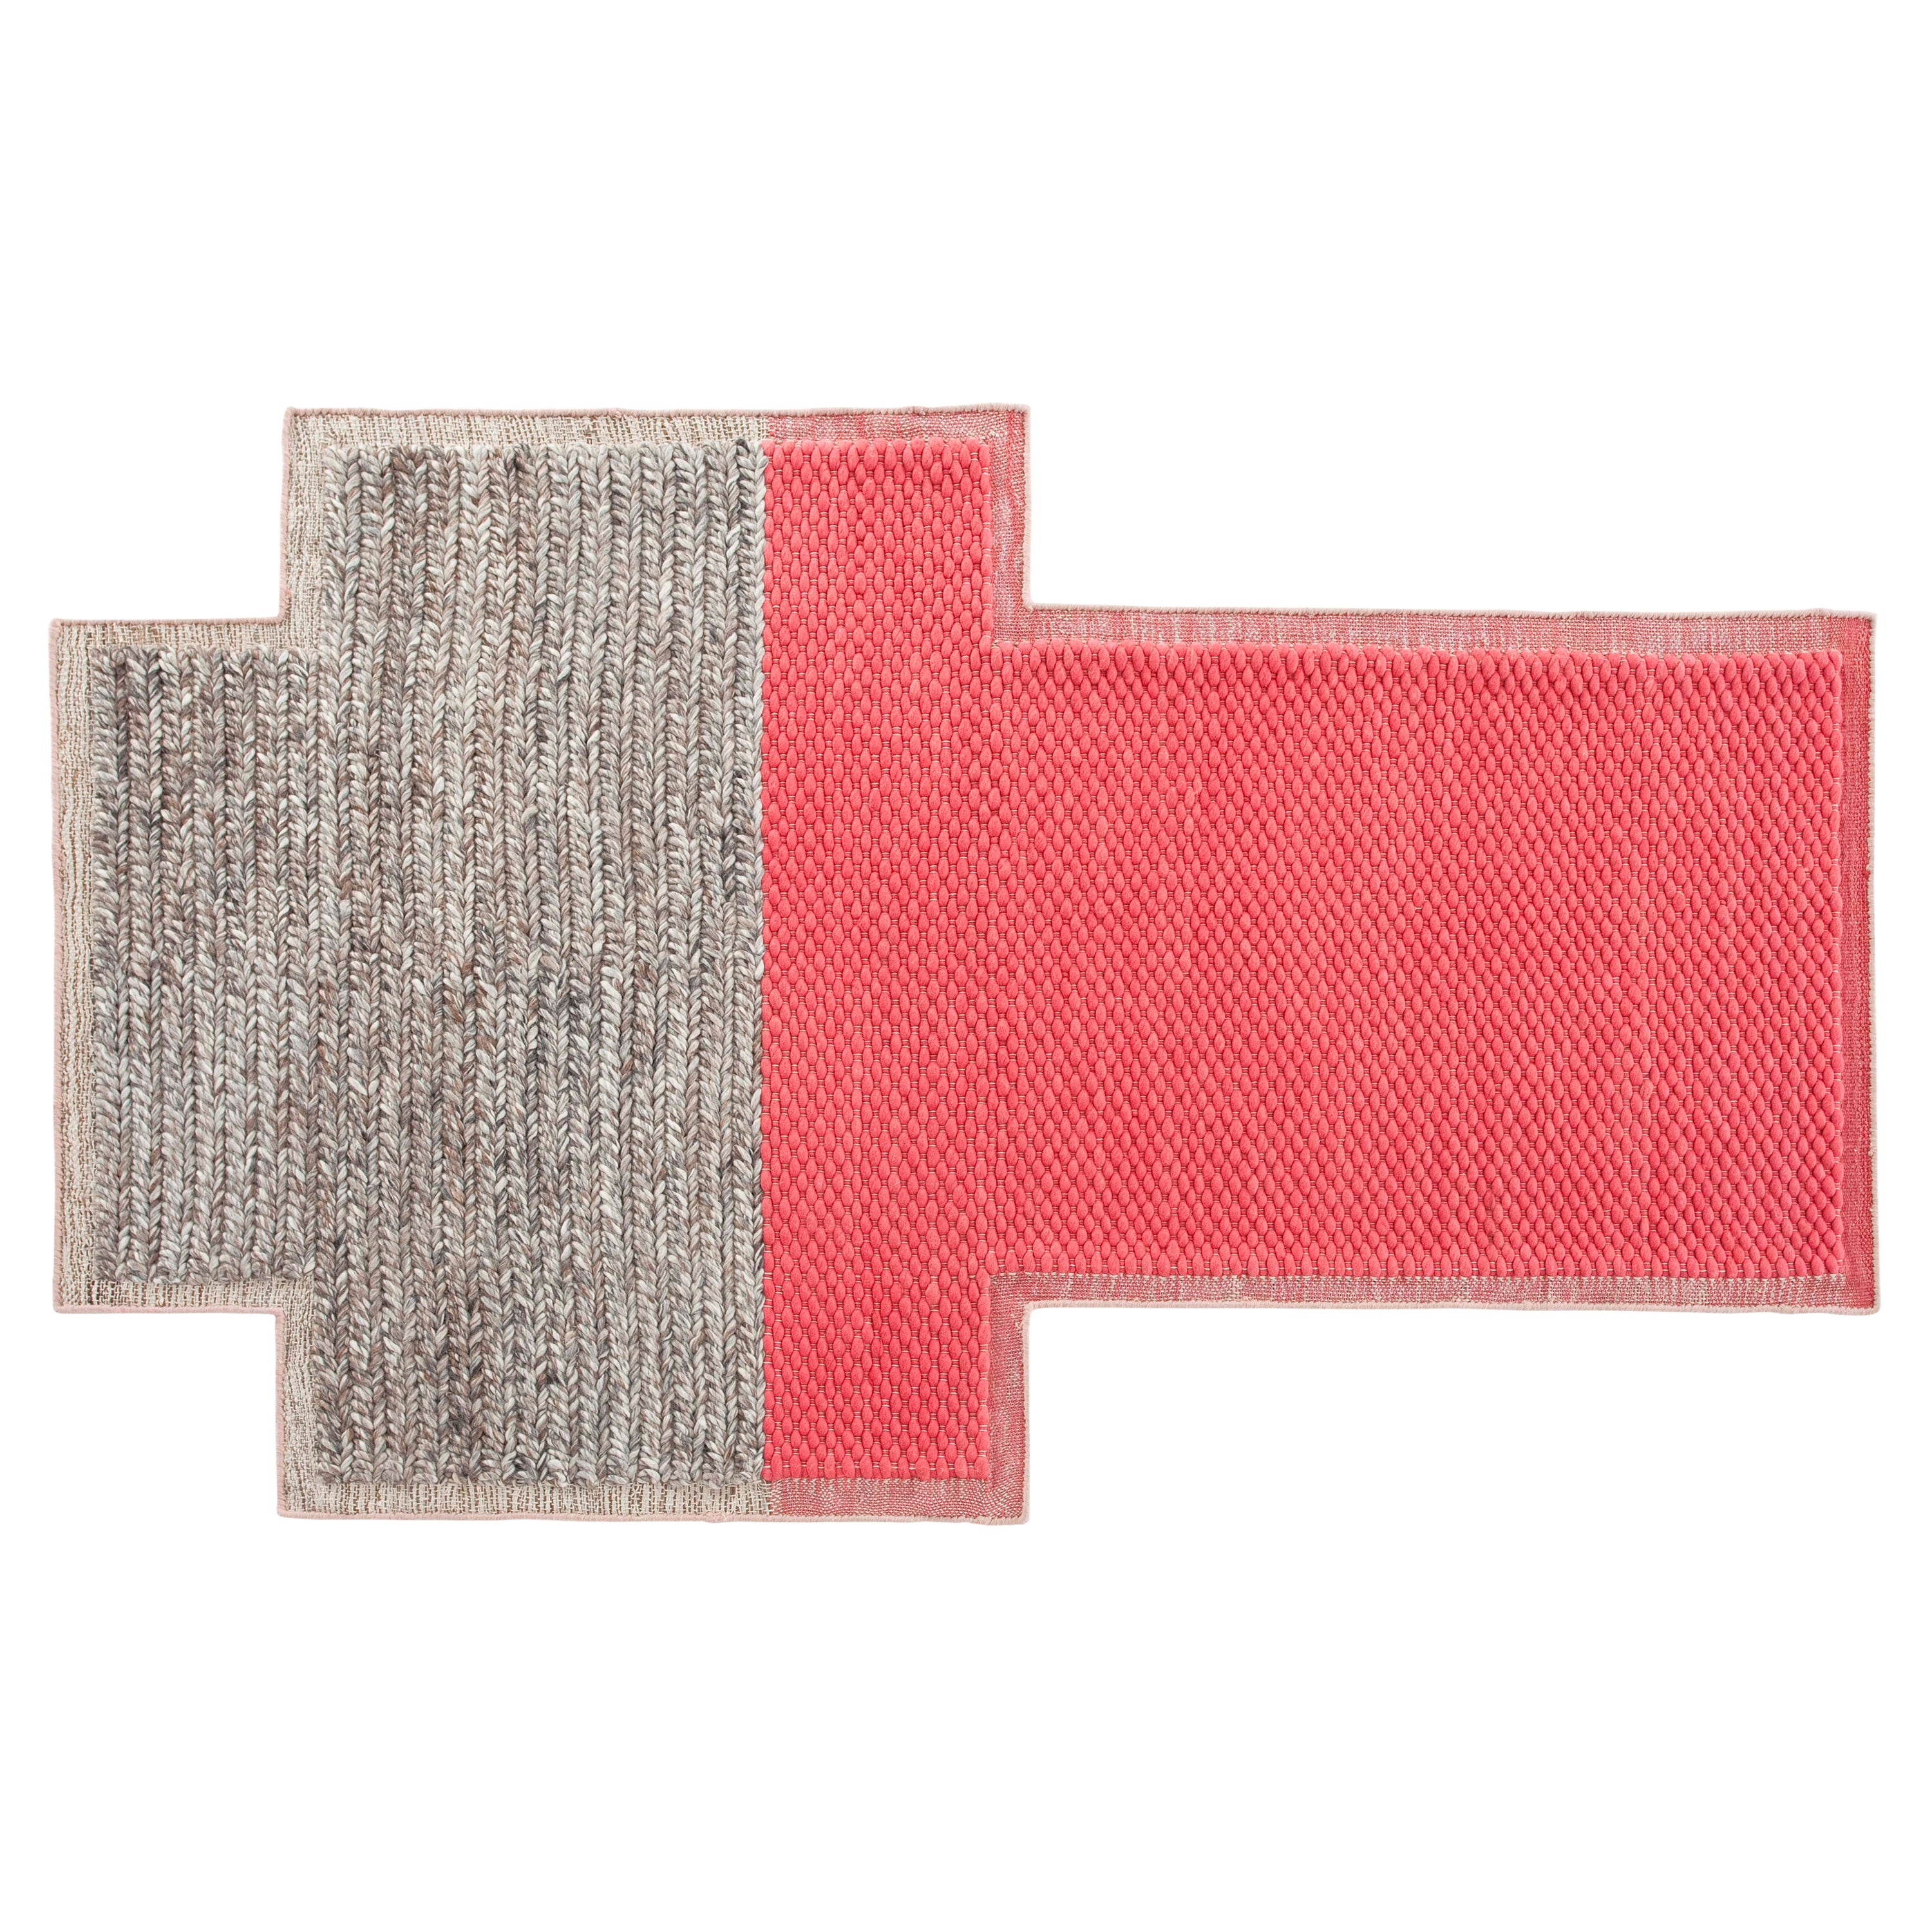 GAN Mangas Space Small Rectangular Rug Plait in Coral by Patricia Urquiola